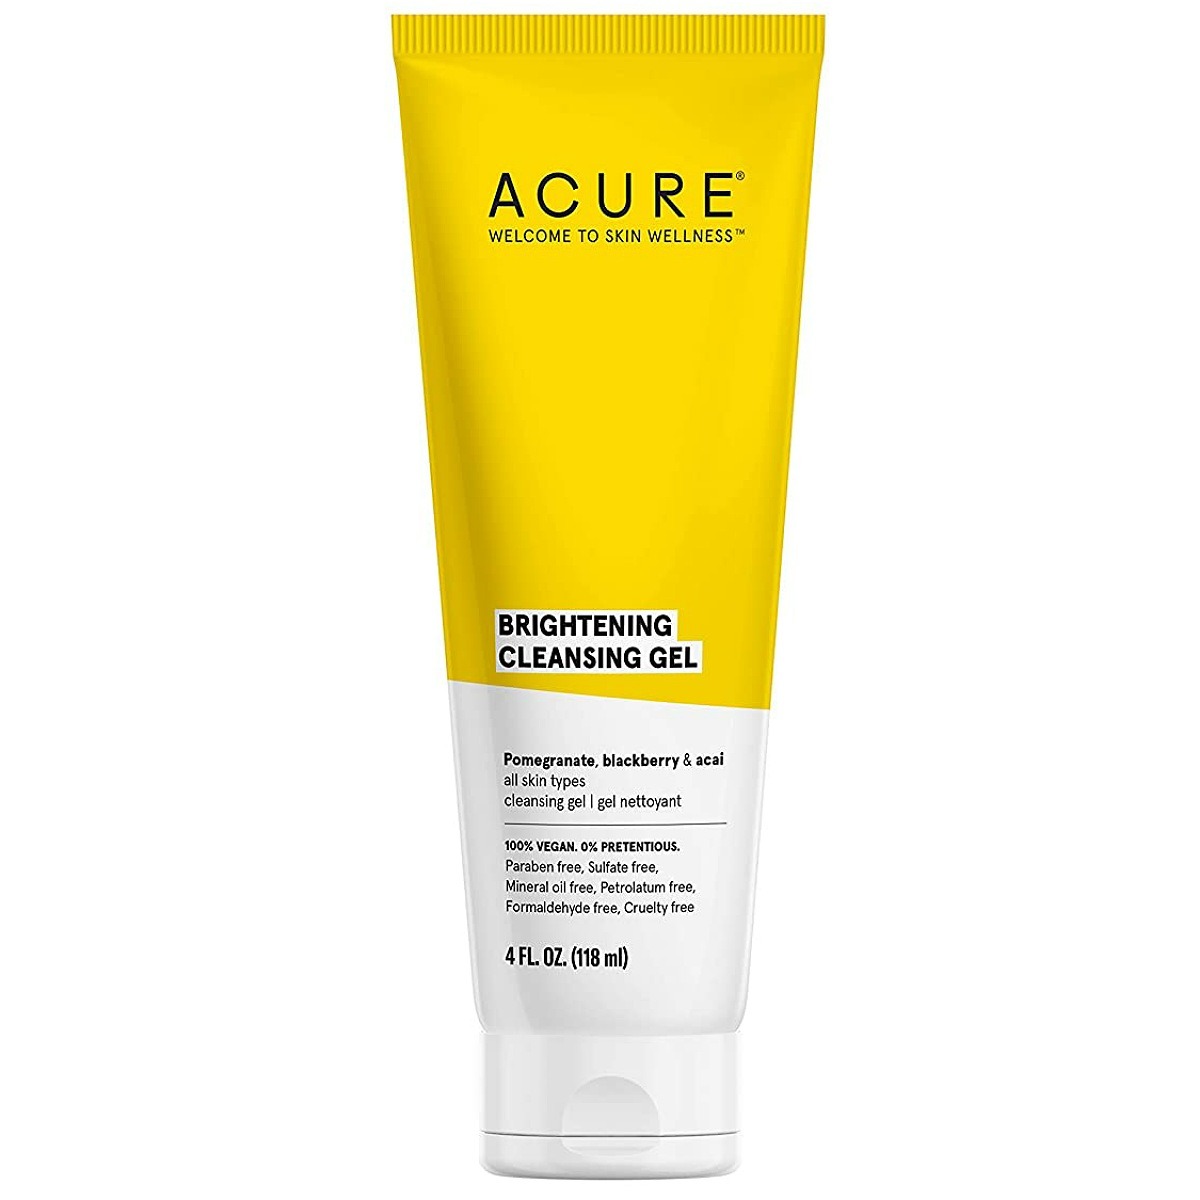 ACURE Brightening Cleansing Gel 100% Vegan For A Brighter Appearance Pomegranate Blackberry & Acai